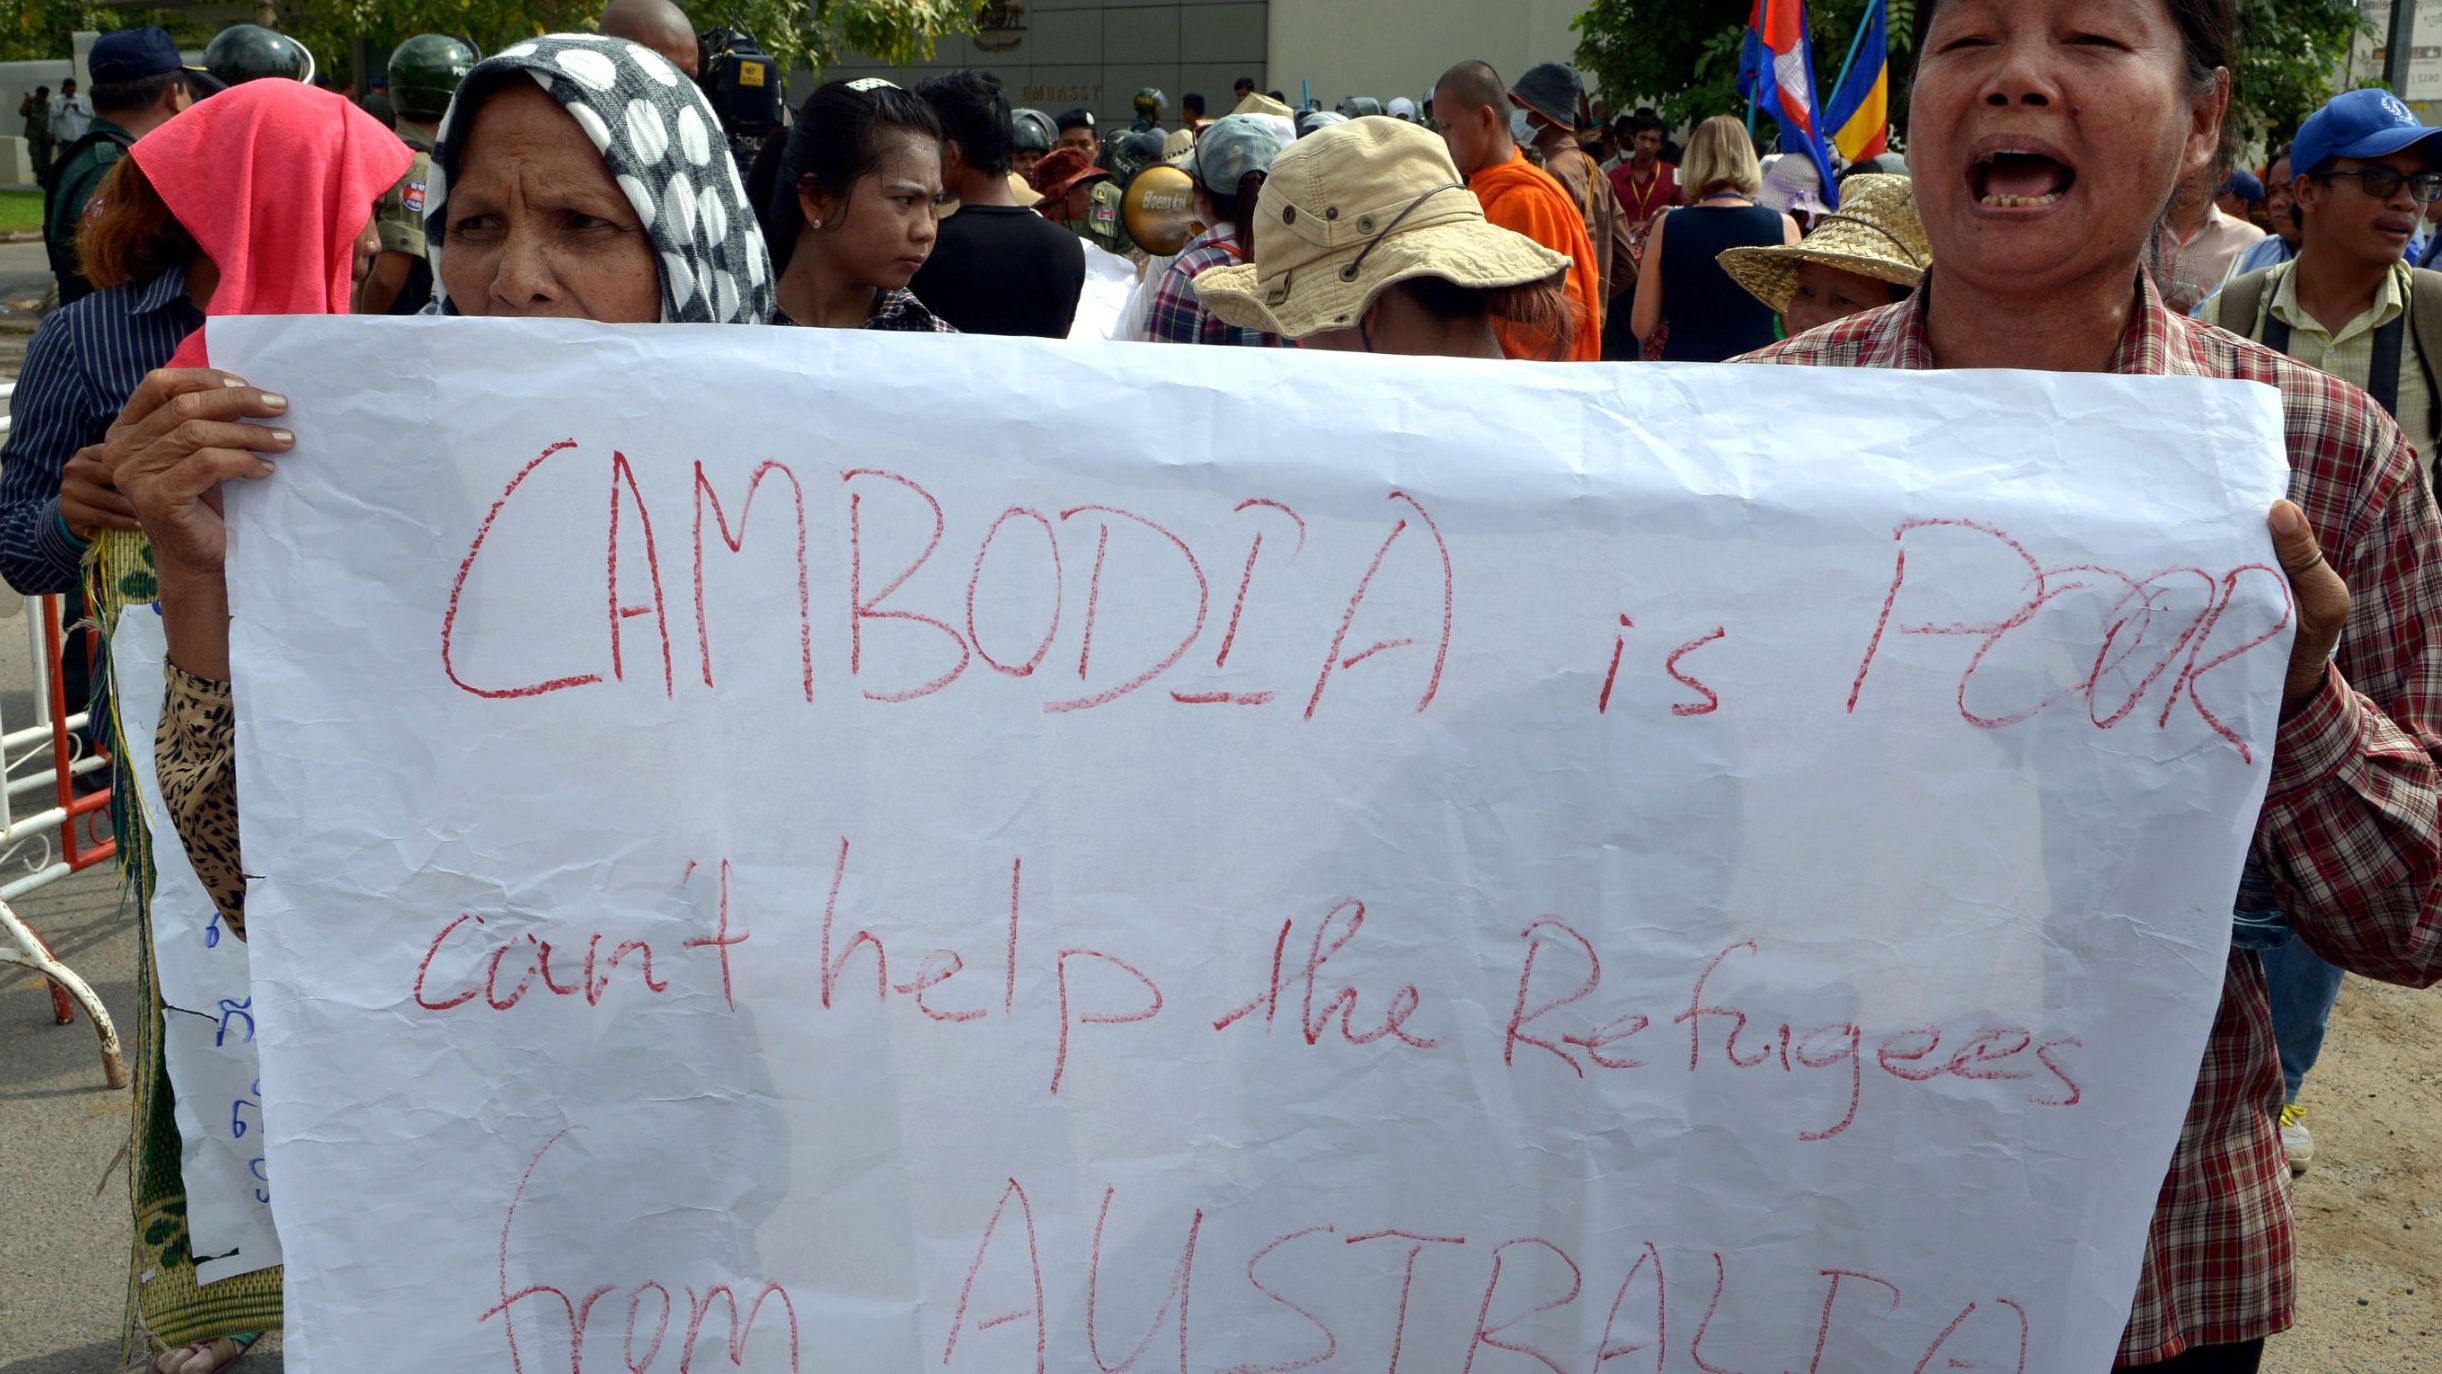 Cambodians protest a deal to take refugees in front of the Australian embassy in Phnom Penh.